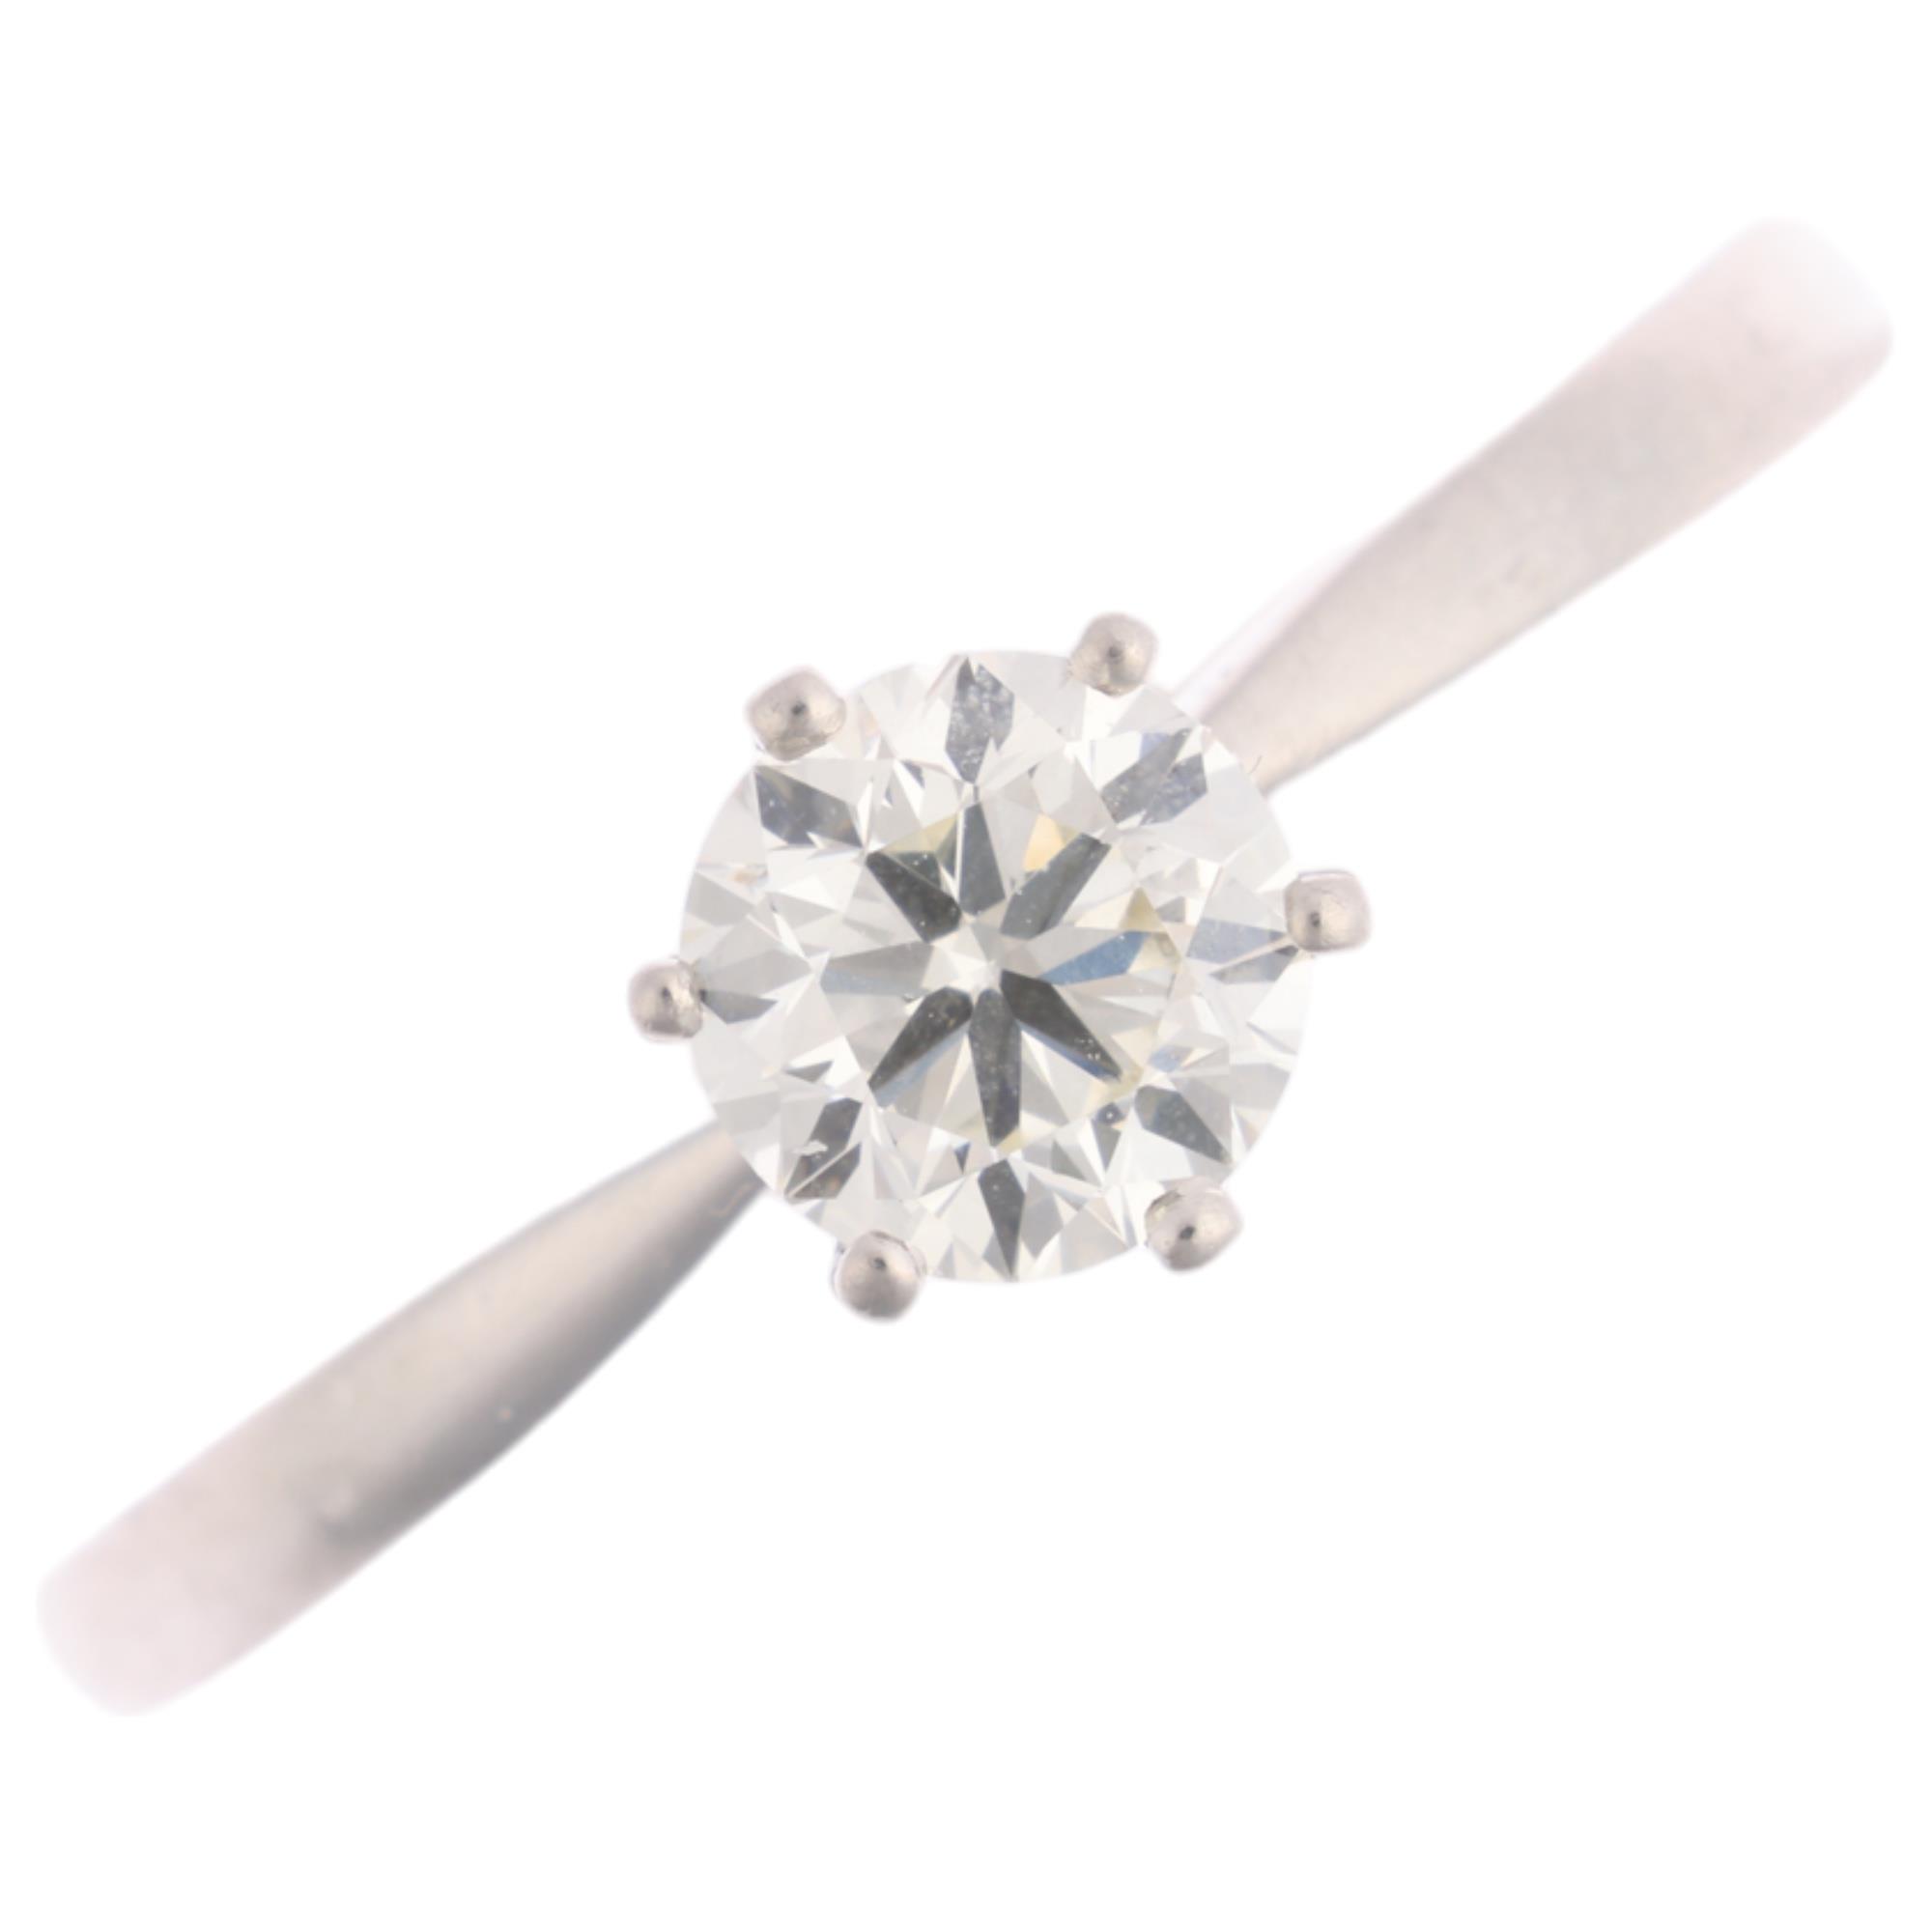 A platinum 0.7ct solitaire diamond ring, 6-claw set with modern round brilliant-cut diamond,